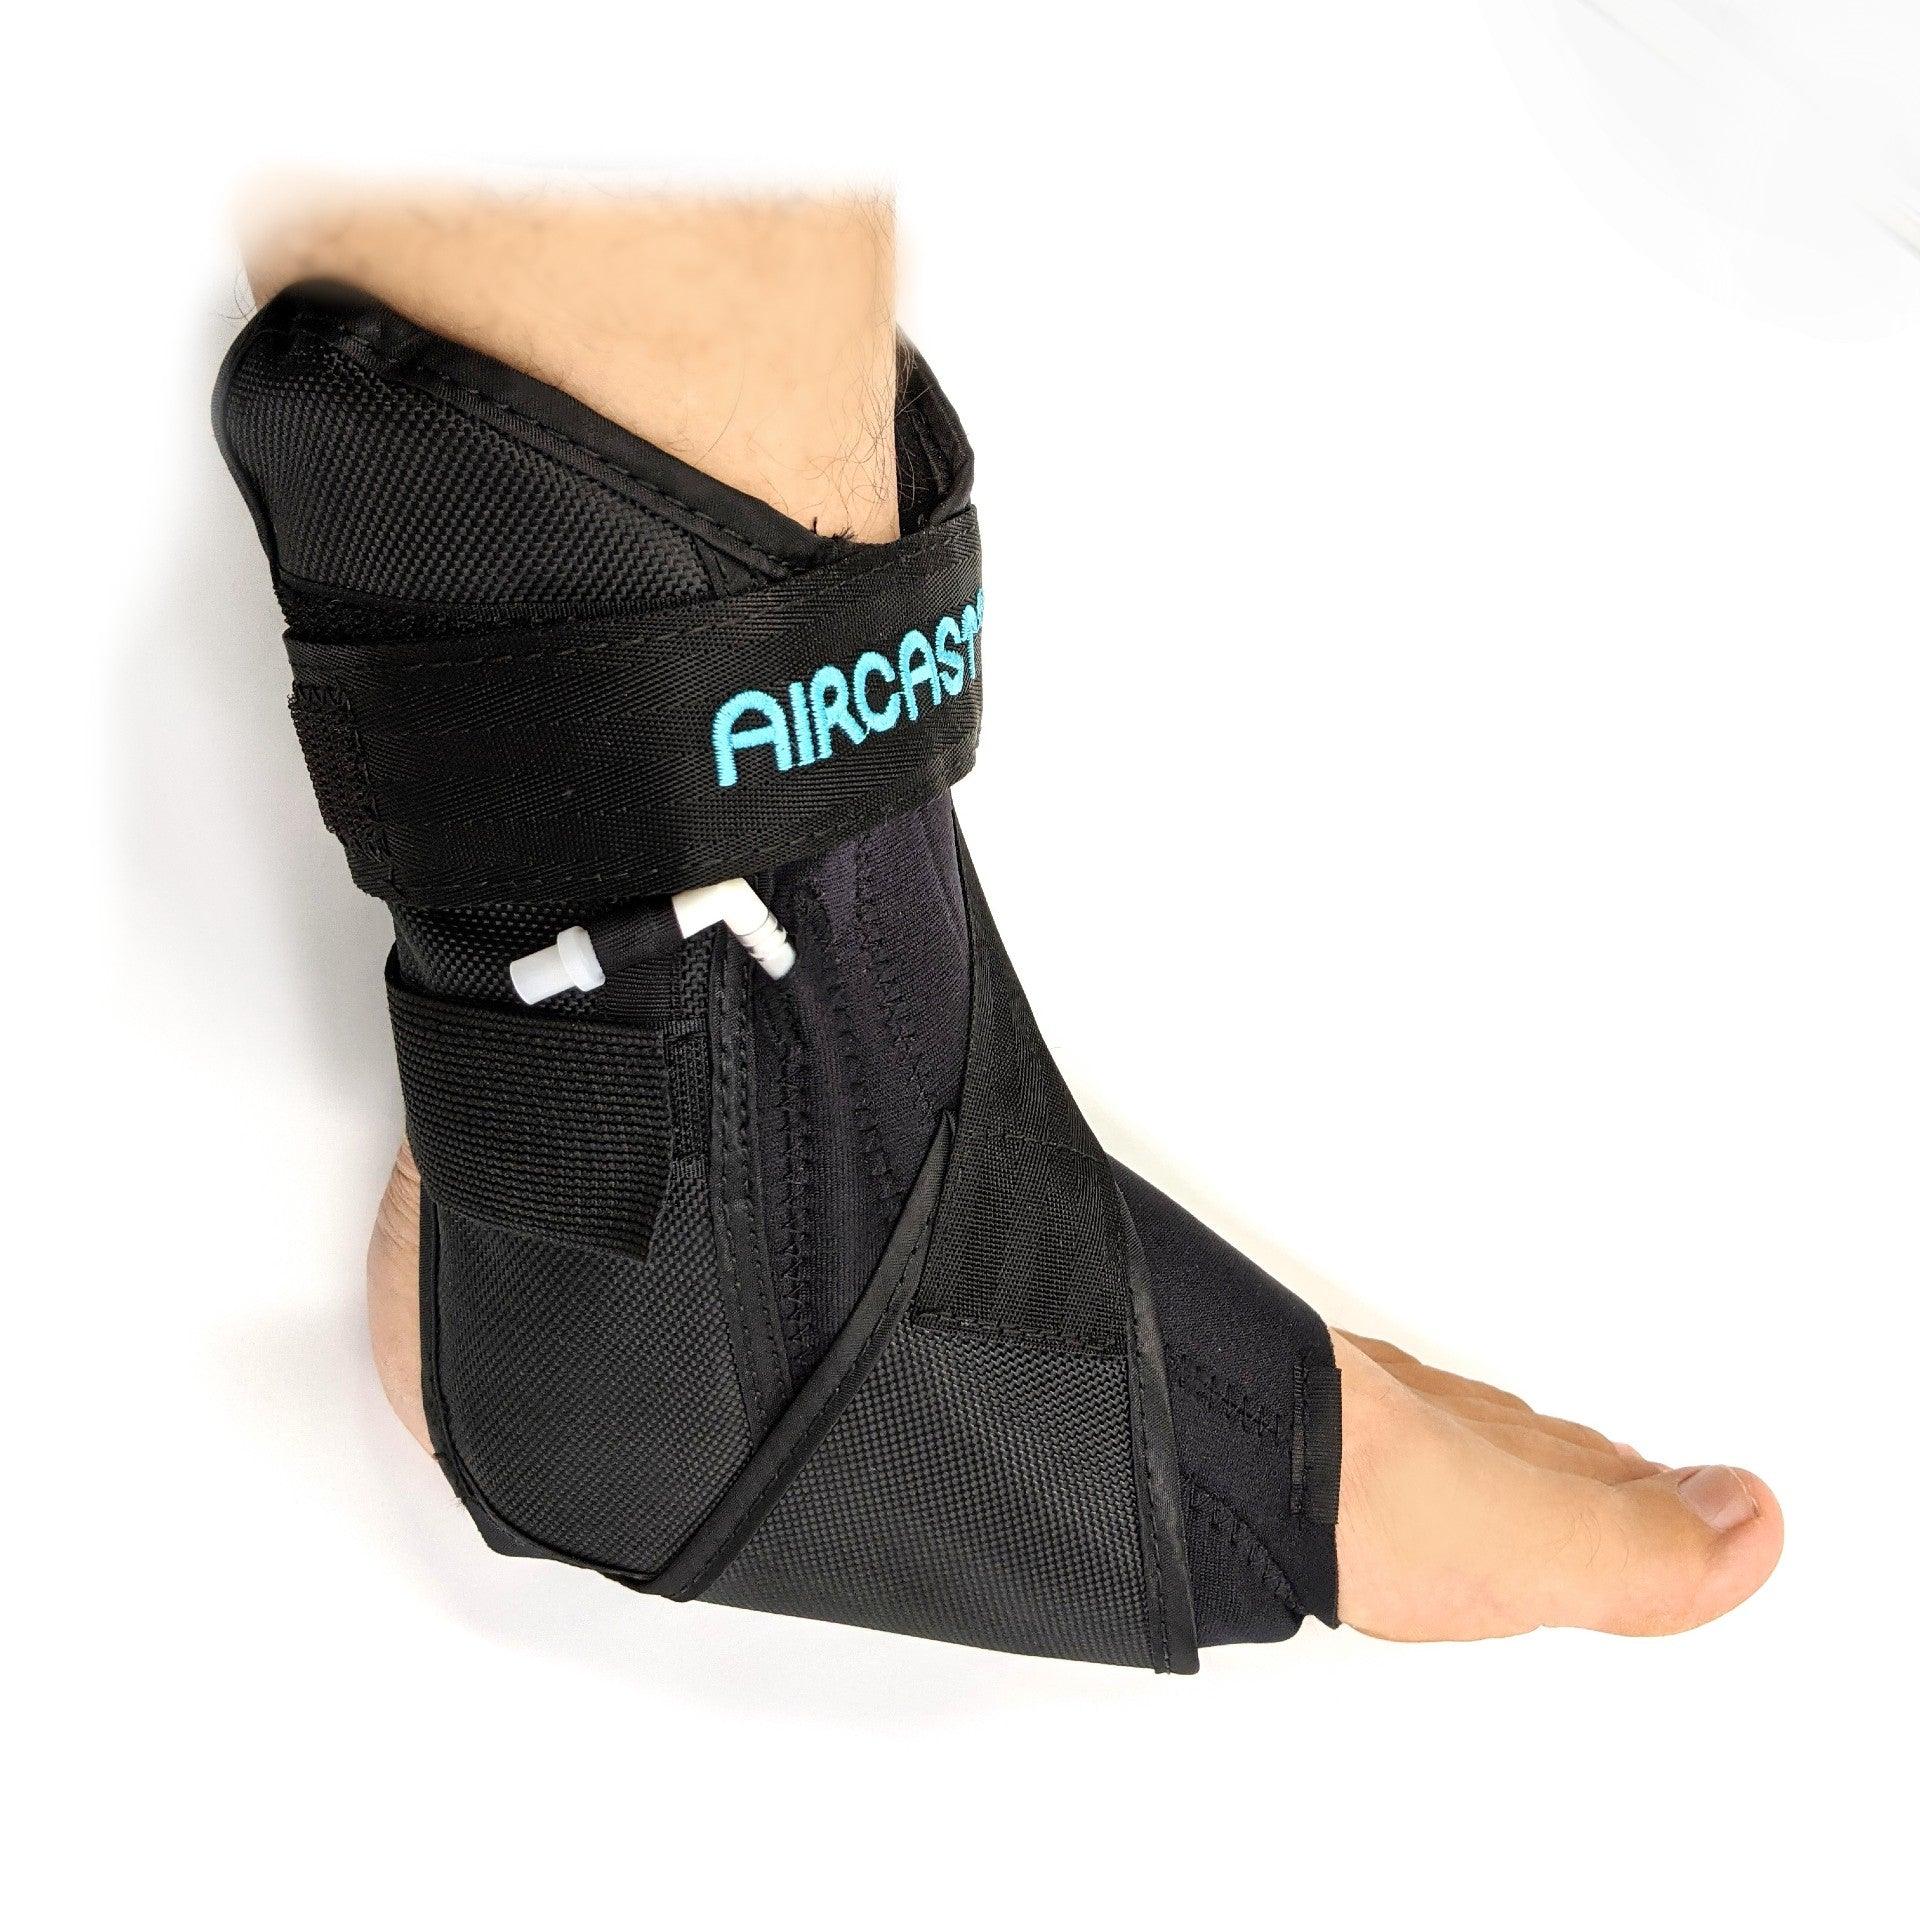 Aircast® Airlift PTTD Brace - 02PSL Aircast® Airlift PTTD Brace - undefined by Supply Physical Therapy Aircast, Ankle, Ankle Brace, Brace, Foot, Foot and Ankle